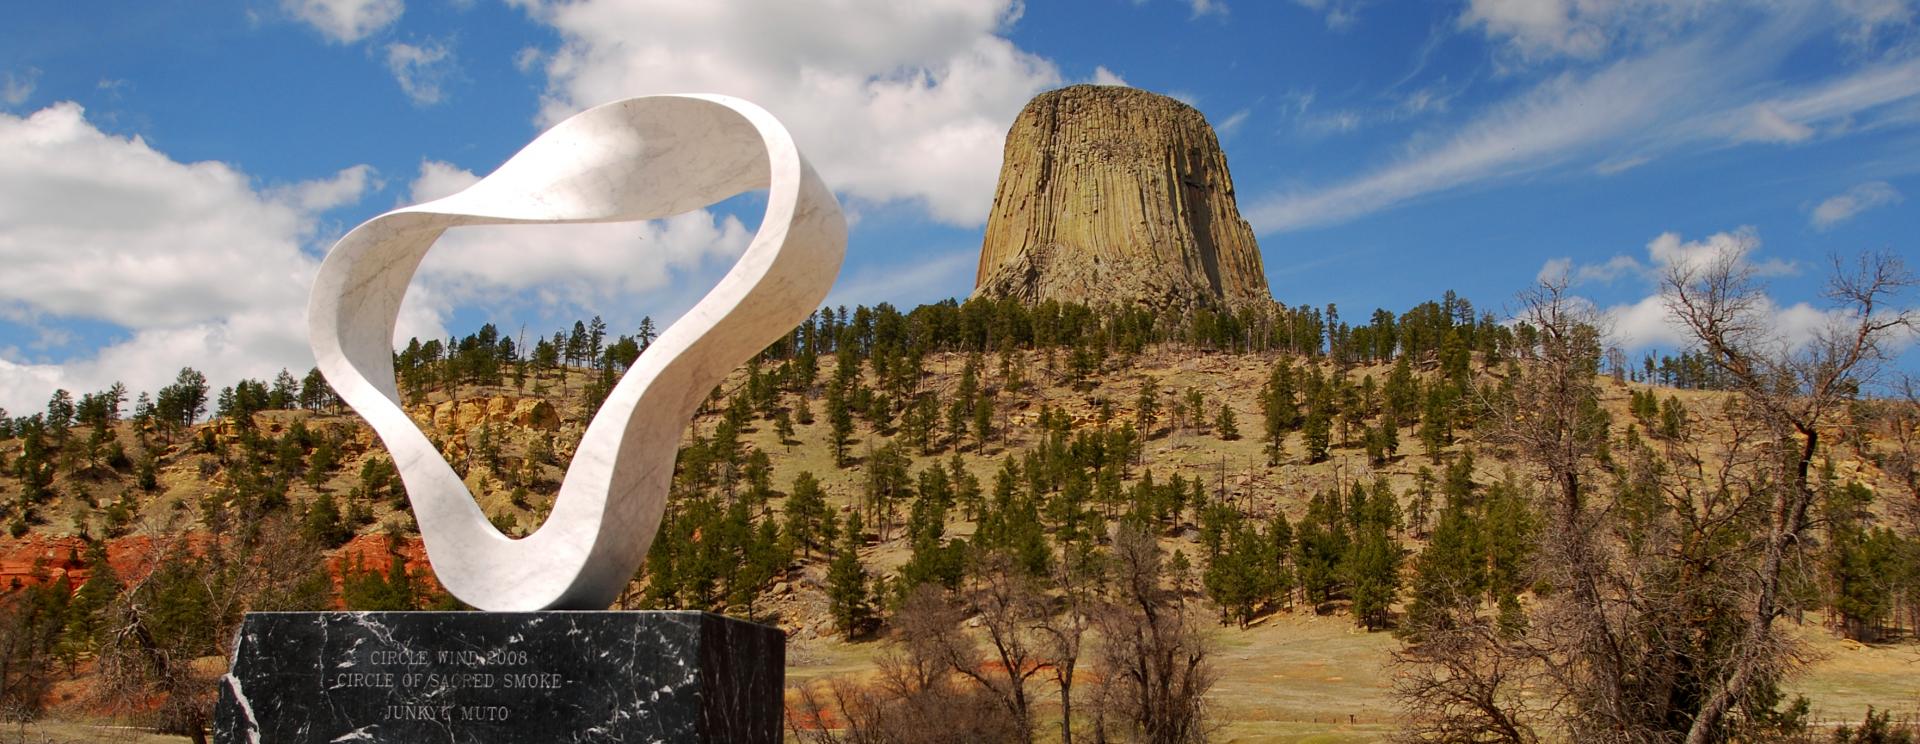 Circle of Smoke Sculpture at Devils Tower National Monument